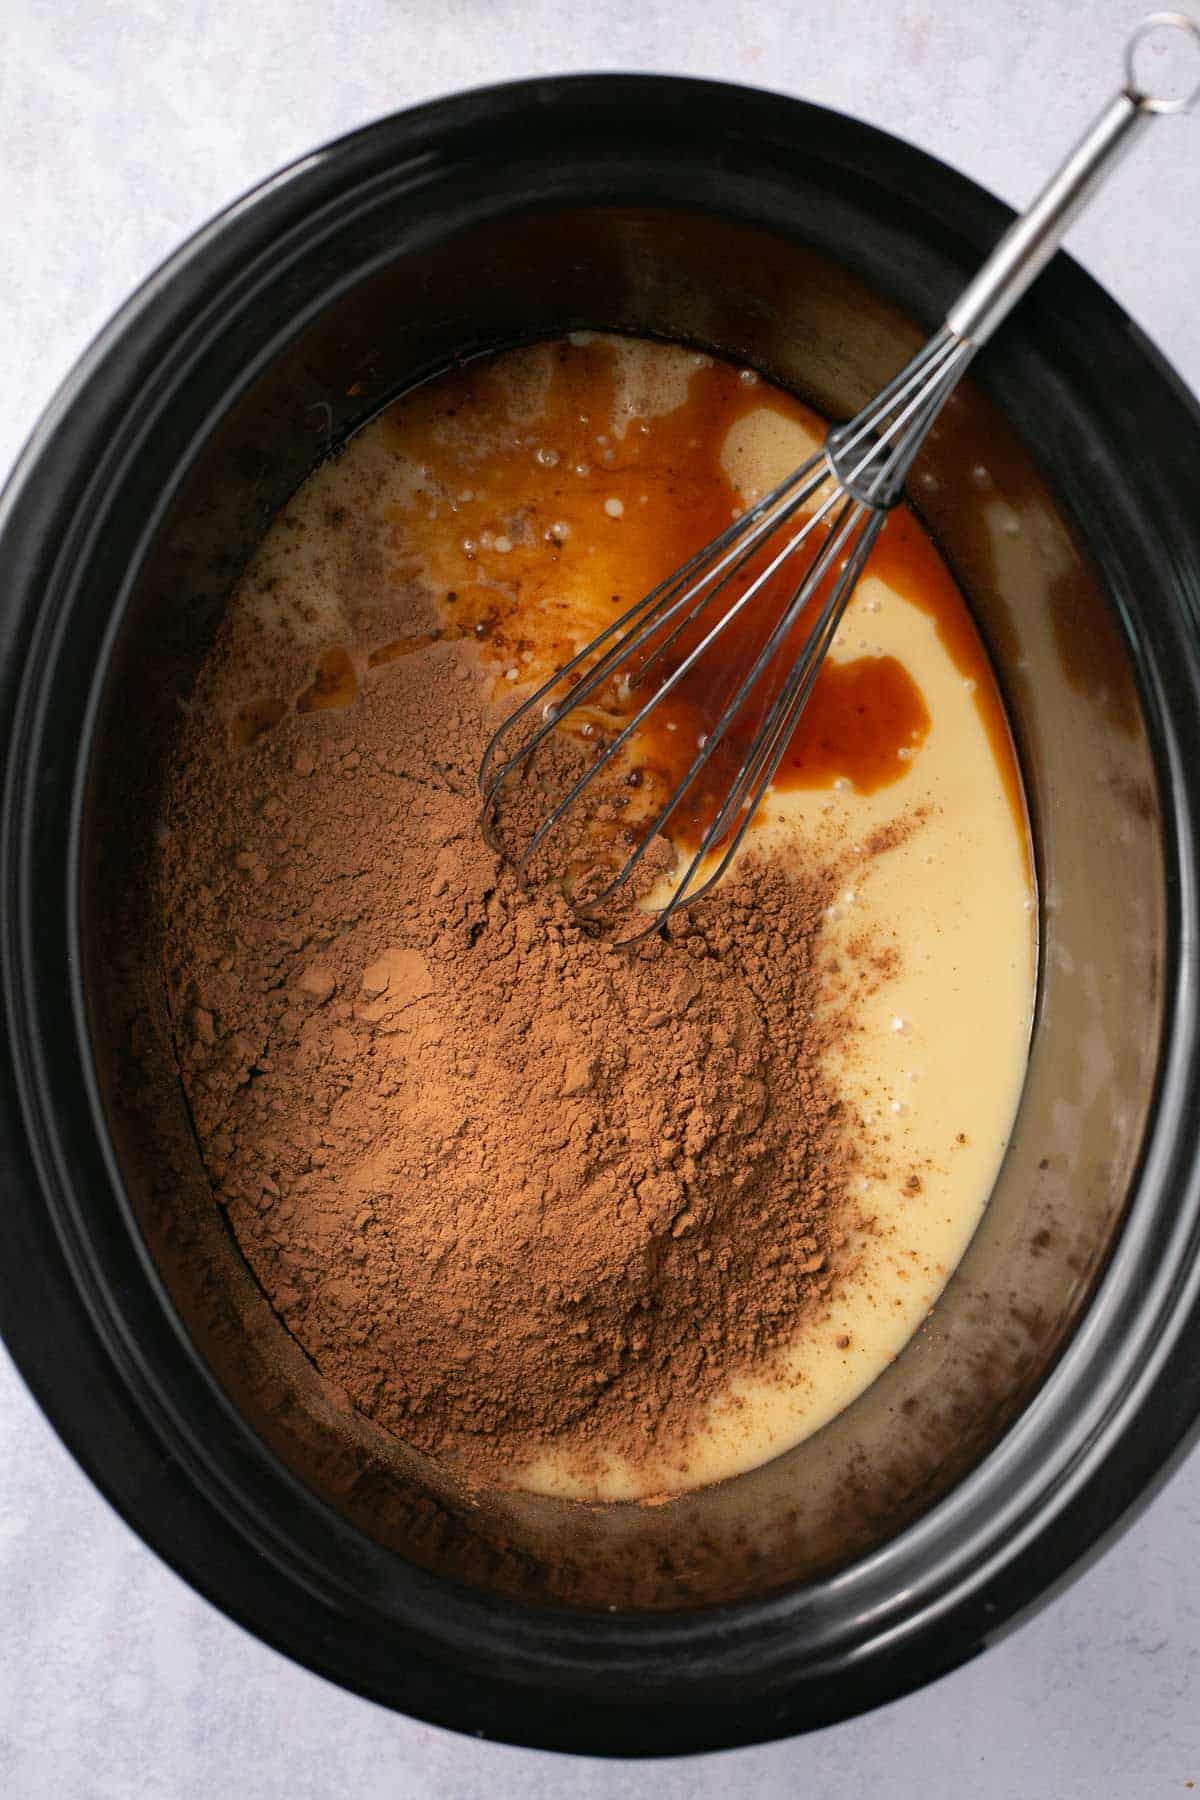 Whisking cocoa with sweetened condensed milk and vanilla.